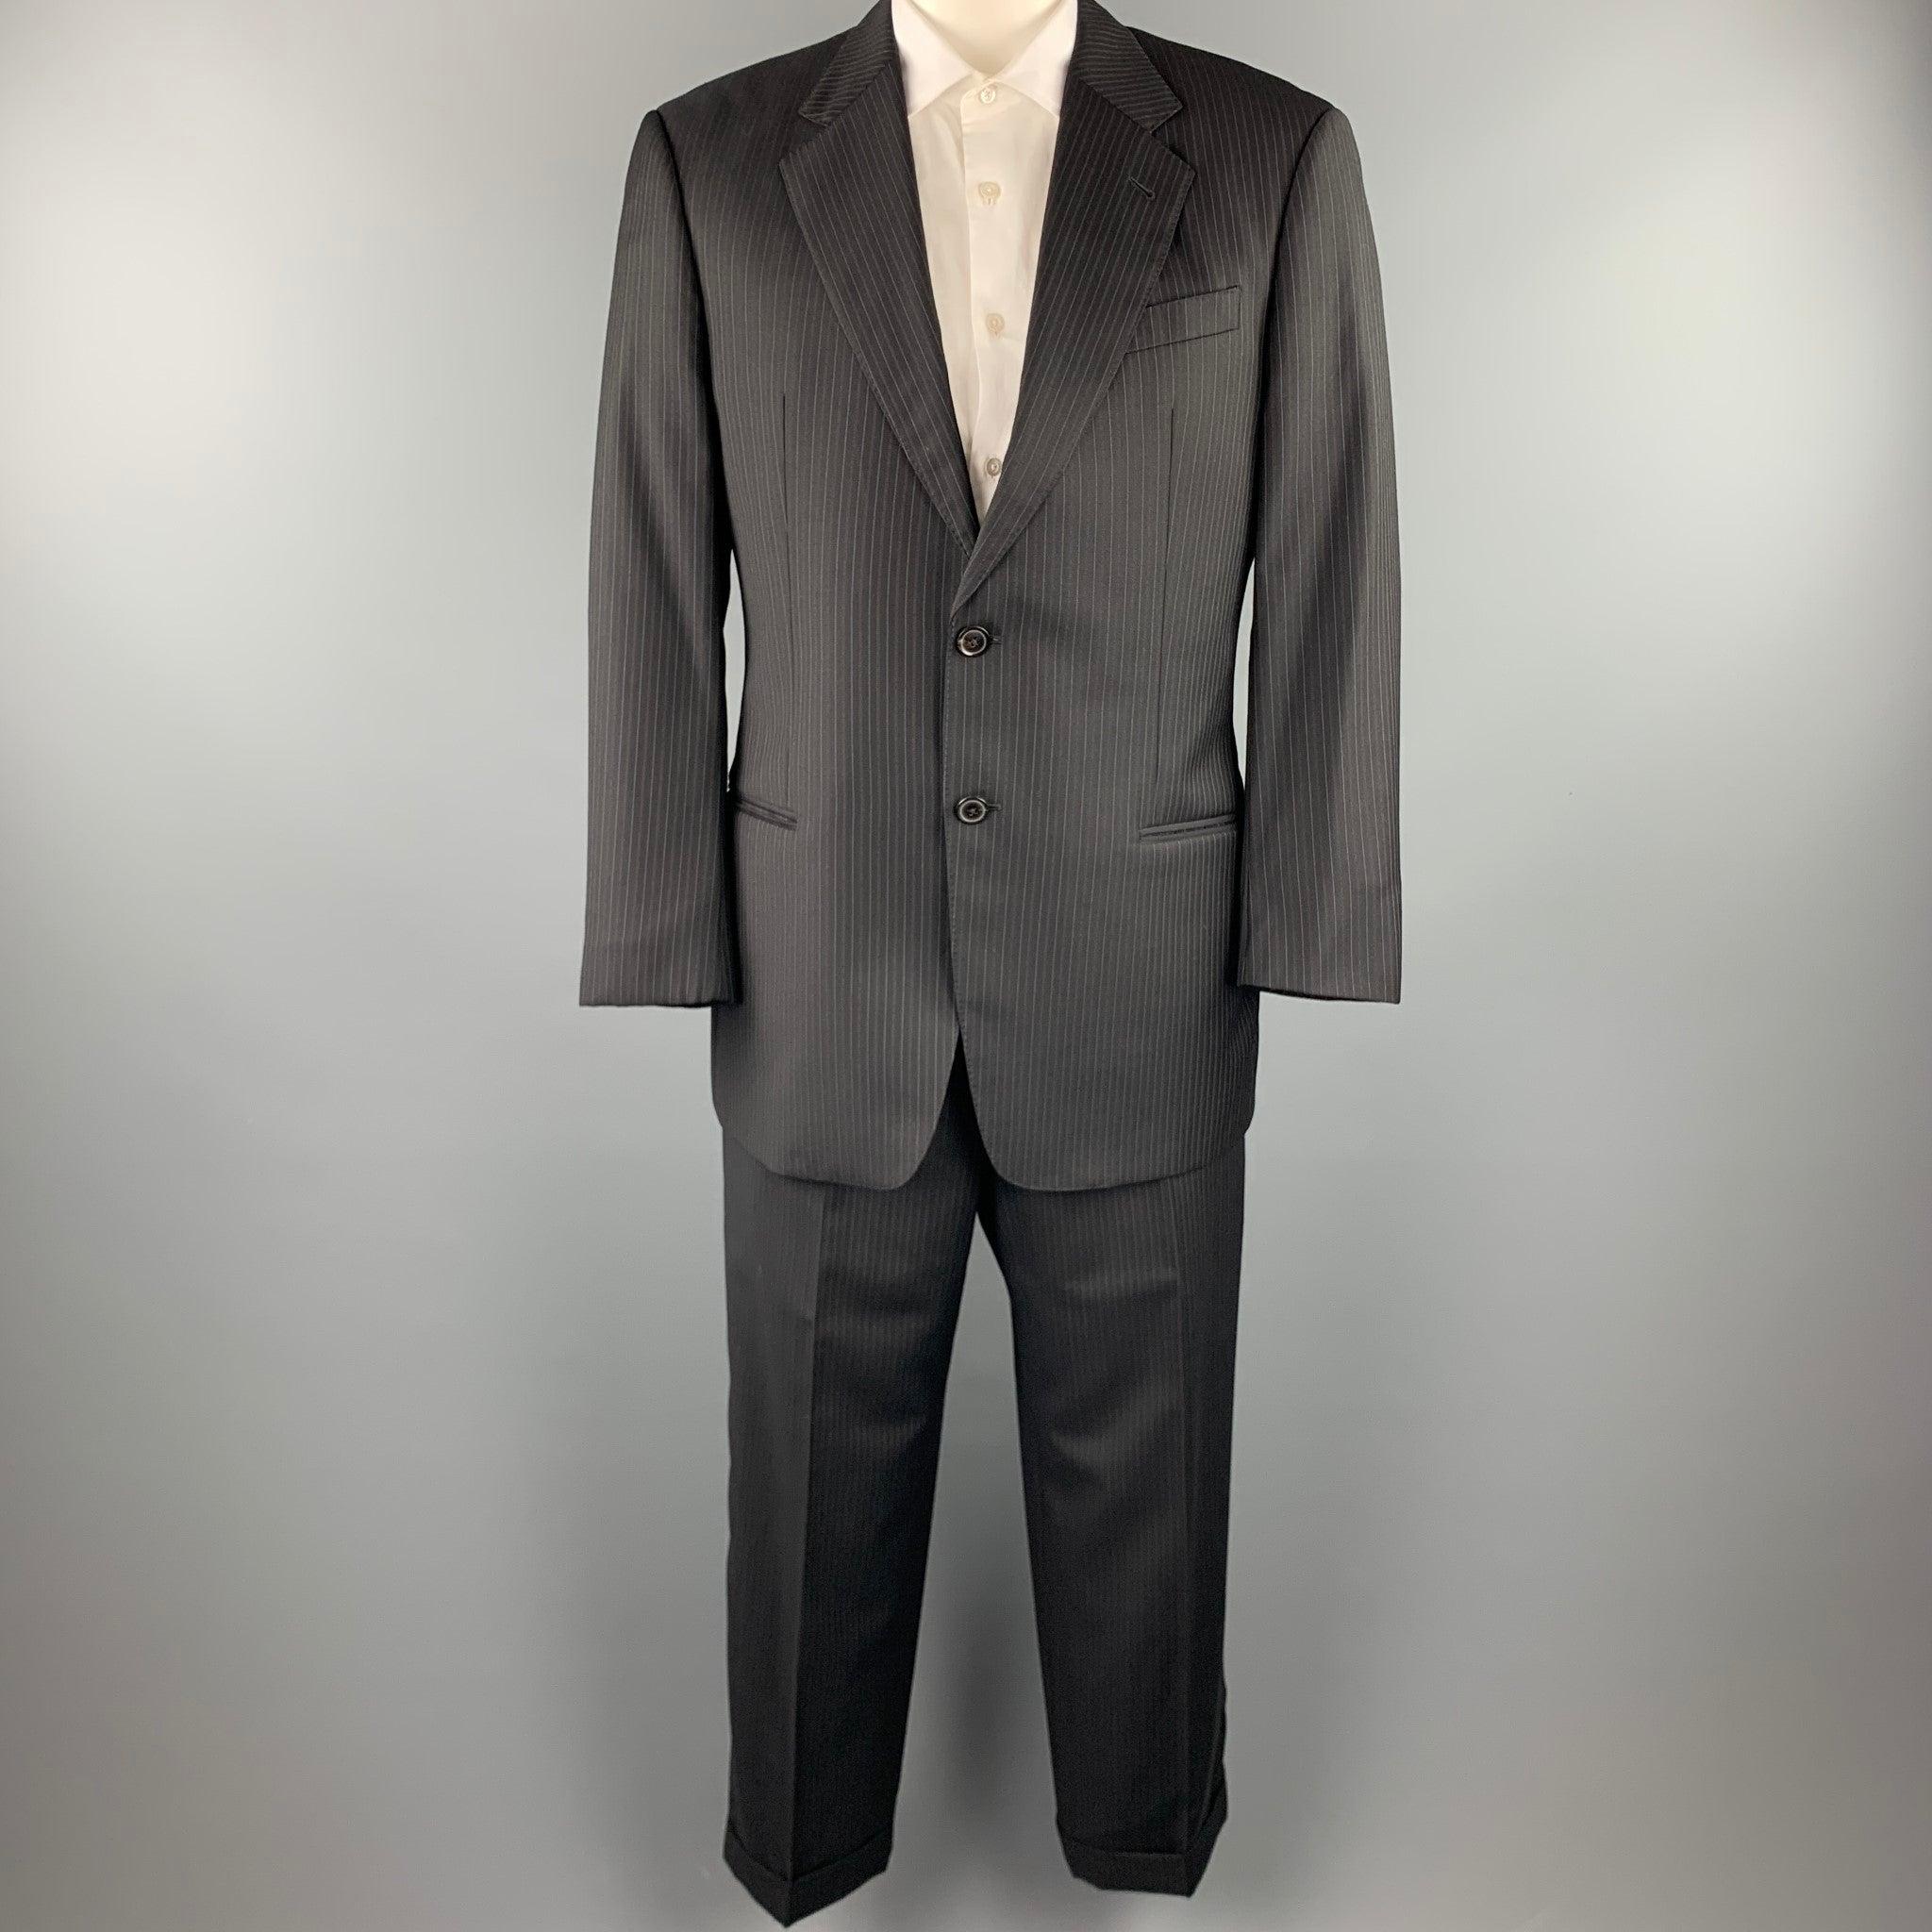 EMPORIO ARMANI
suit comes in a black stripe wool with a full liner and includes a single breasted, two button sport coat with a notch lapel and matching flay front trousers. Made in Italy.Very Good Pre-Owned Condition. 

Marked:   42 R
